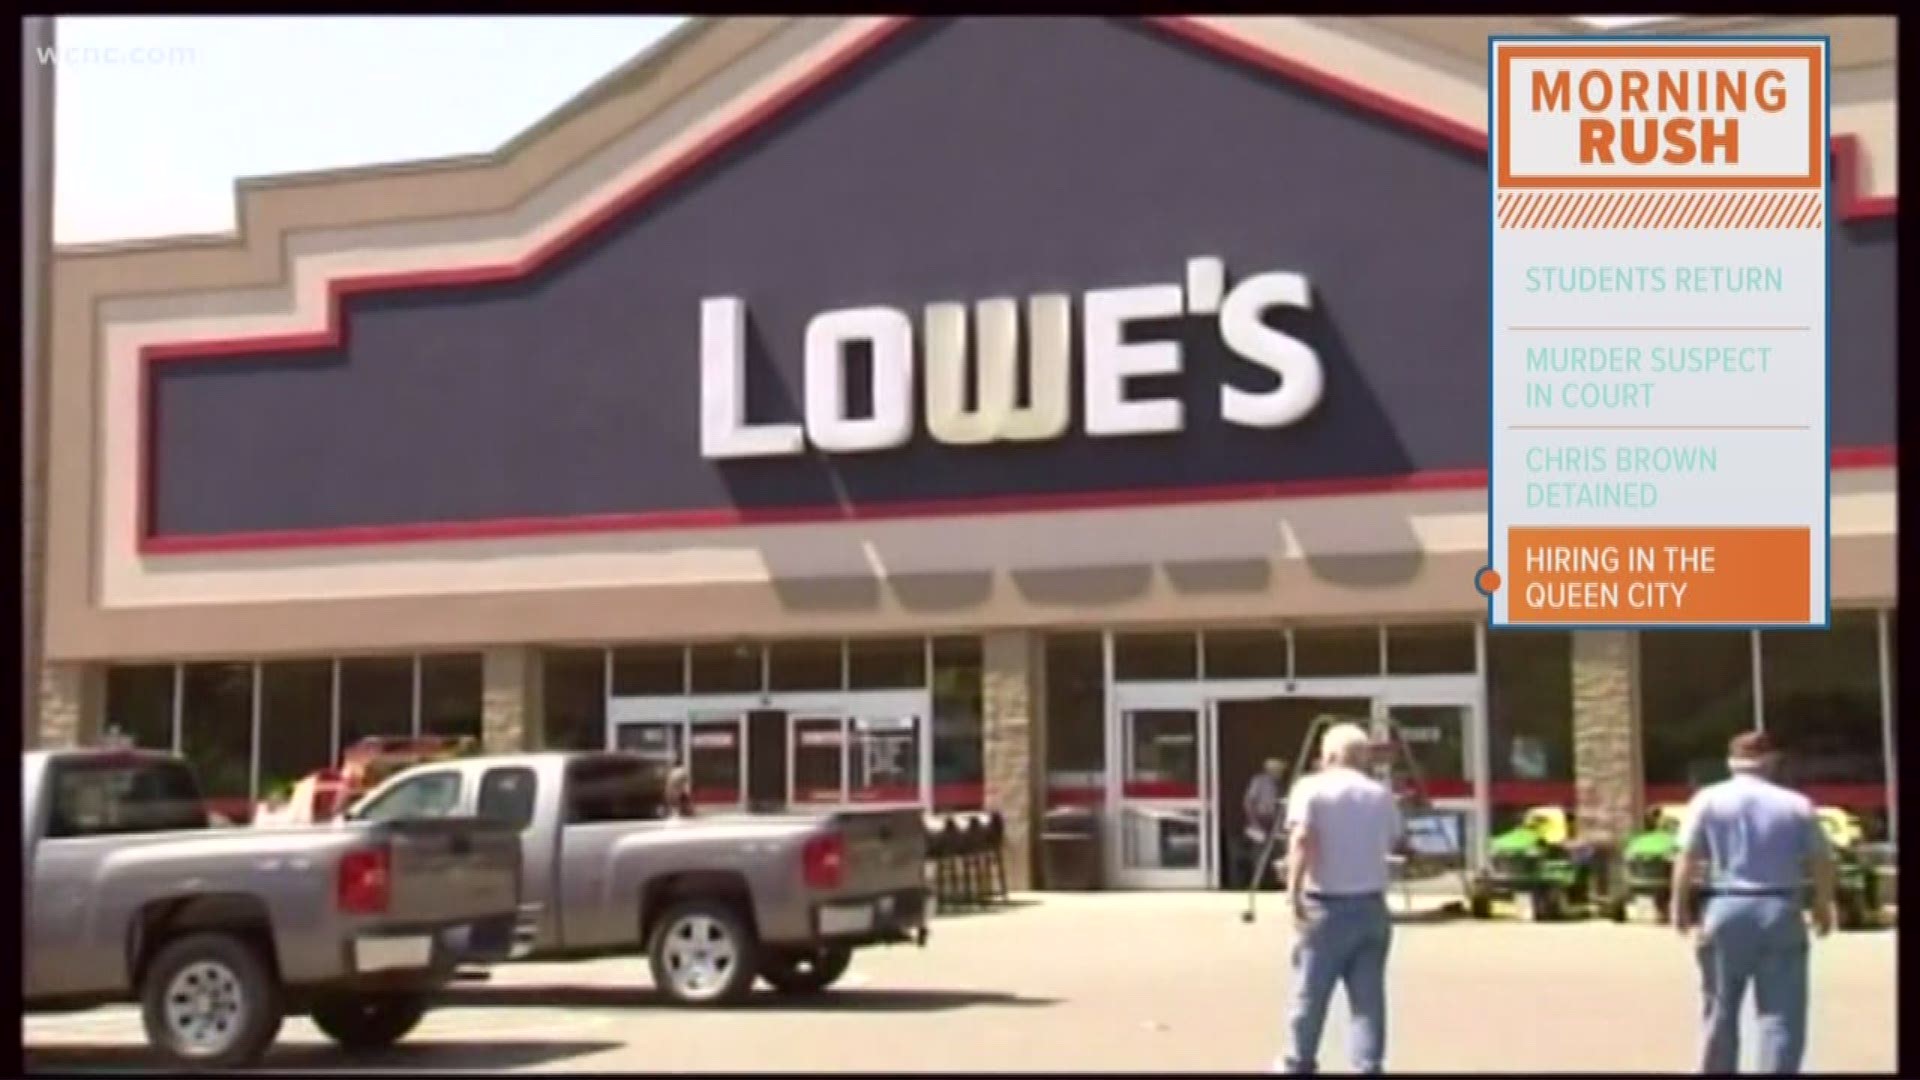 Home improvement retailer Lowe's will hold a job fair at multiple stores in the Charlotte area as part of a nationwide hiring of more than 50,000 seasonal employees.